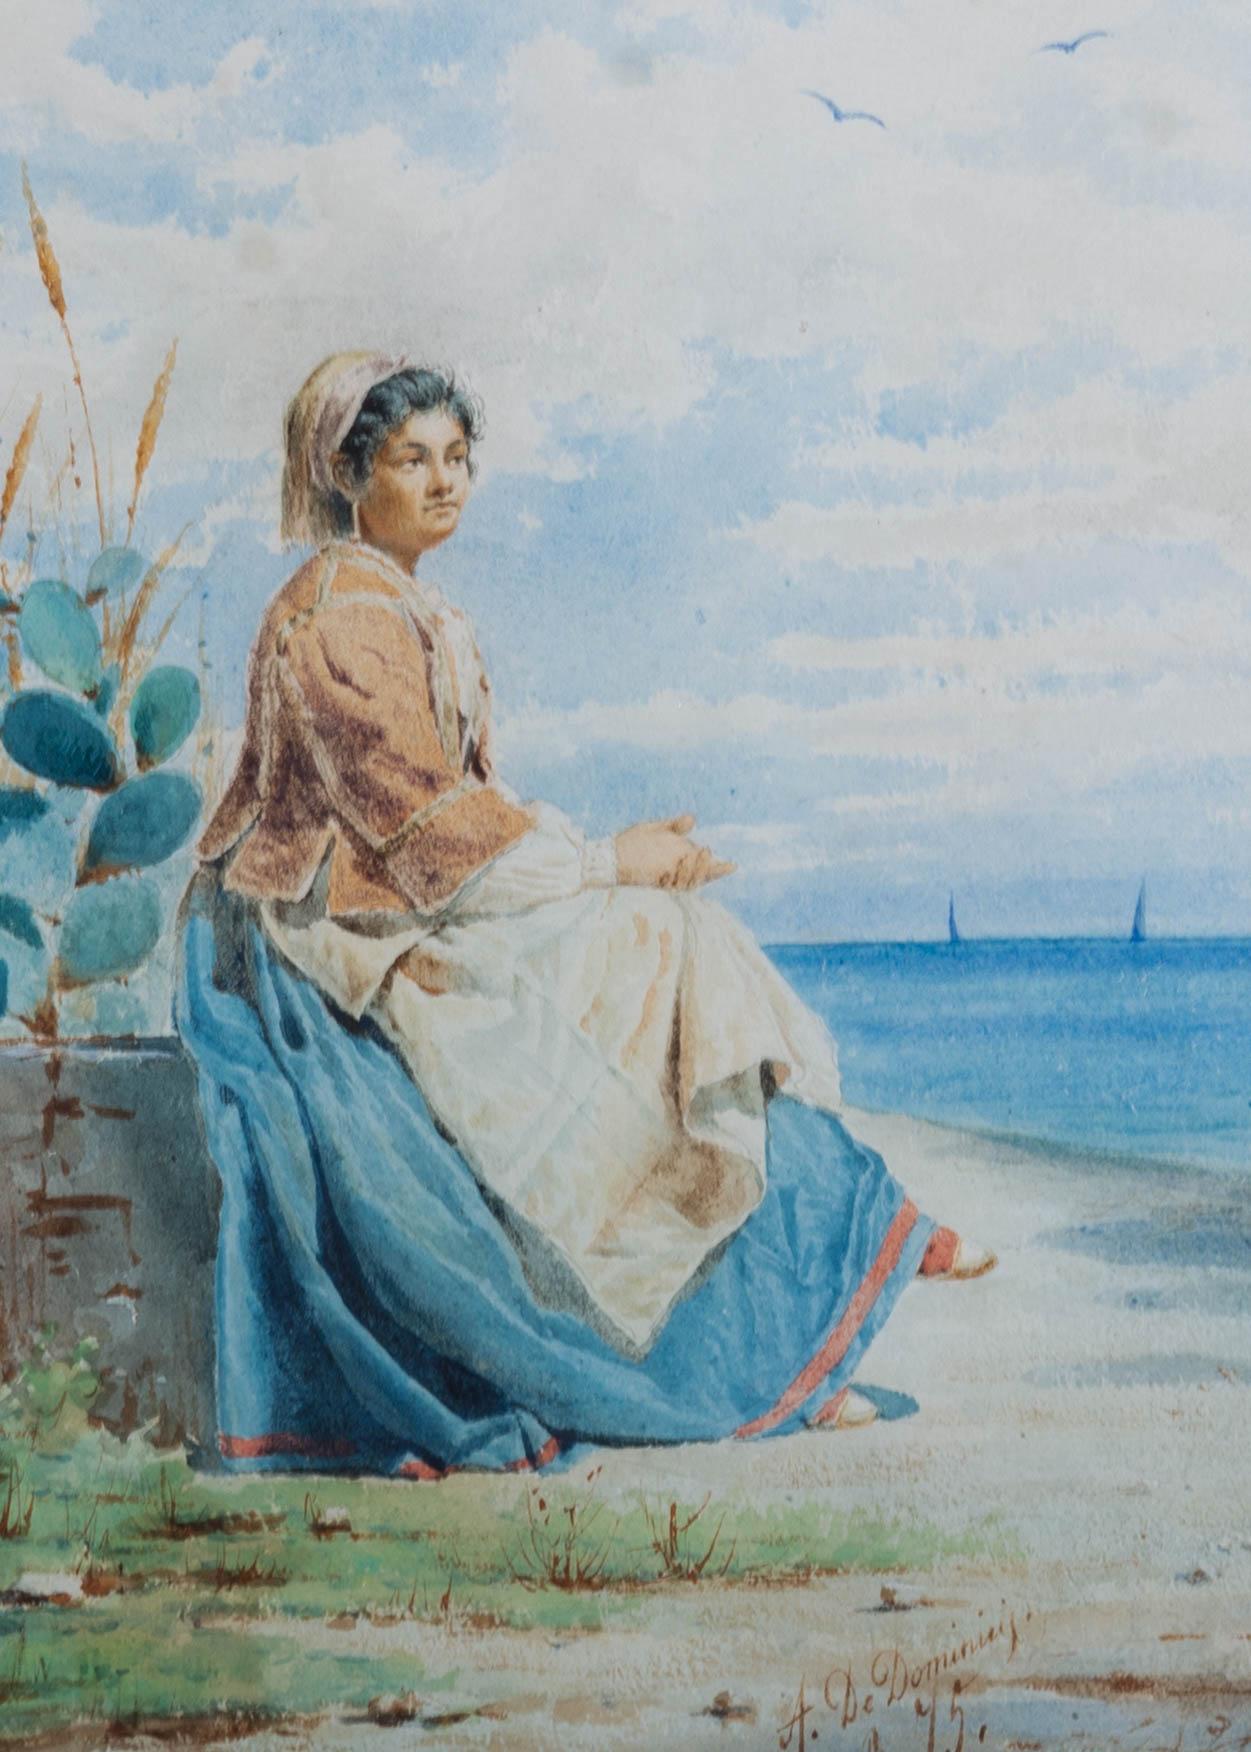 A very fine watercolour study by the Italian painter Achille De Dominicis (1851-1917). Here the artist has depicted a pretty young Italian woman, she is seated on a stone wall as she looks out to sea. The fine brushwork and warm colour palette are